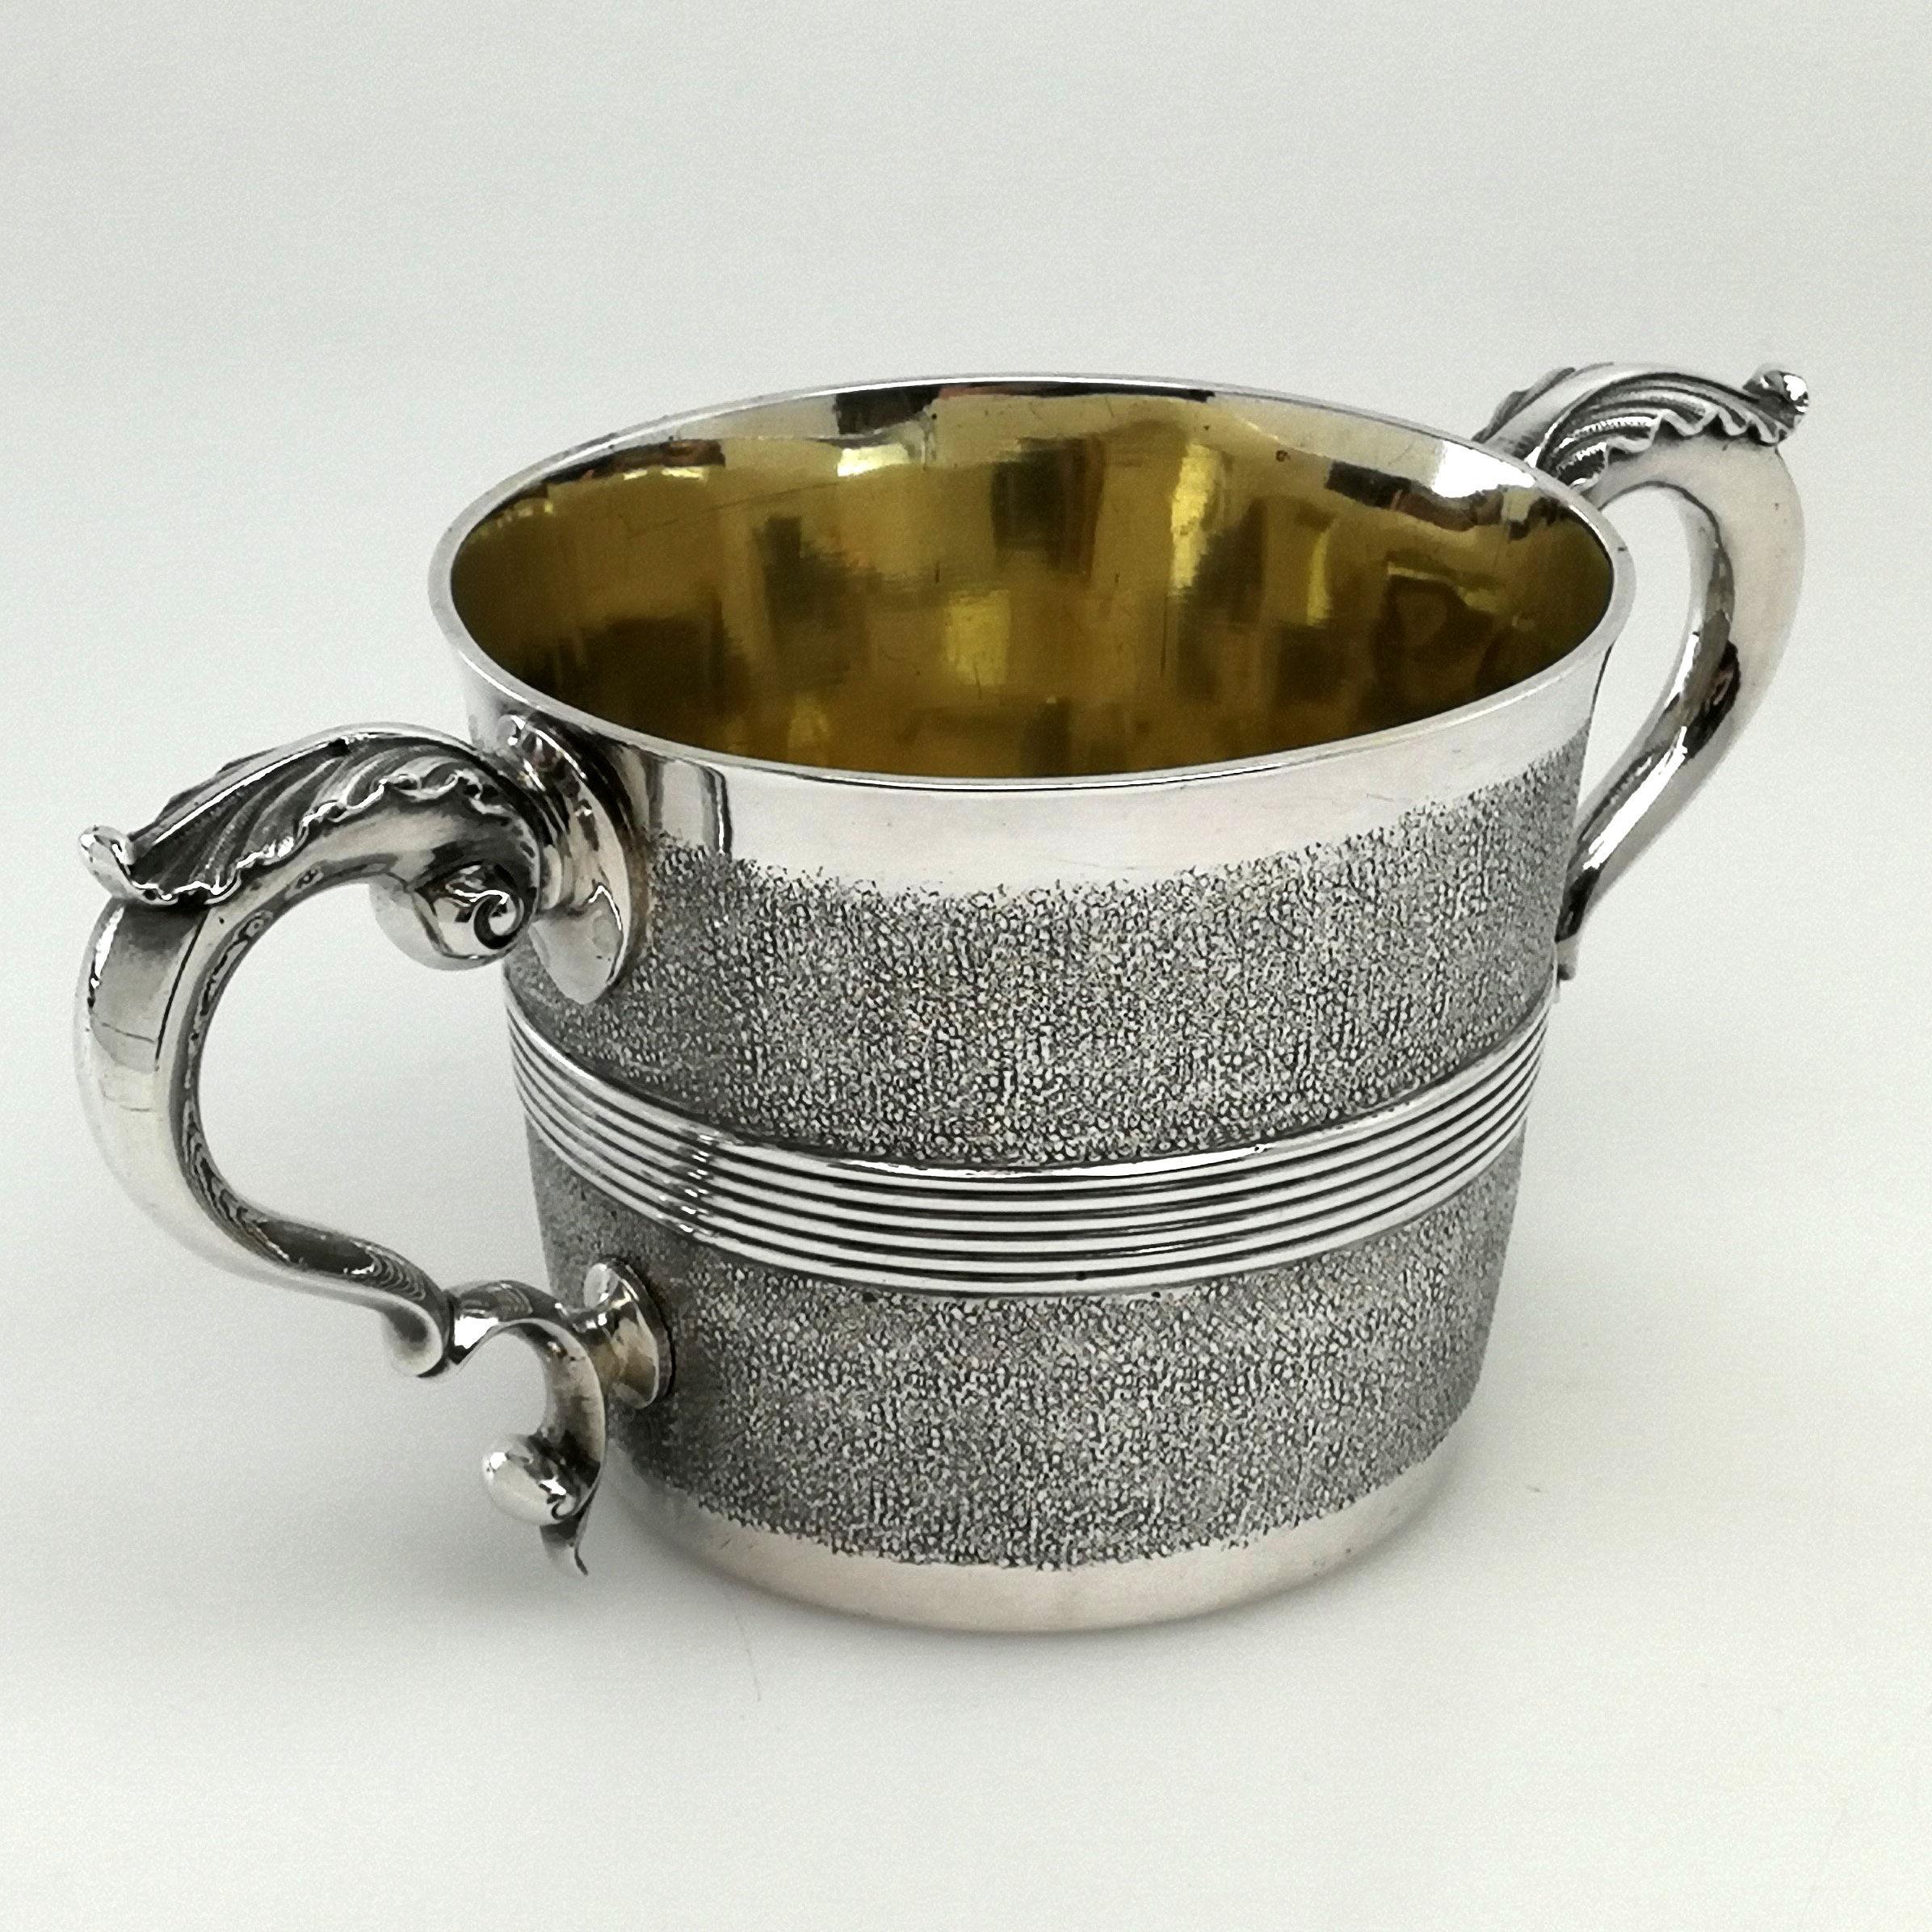 A rare antique George III solid silver Cup with two impressive acanthus leaf scroll handles. The exterior of the cup is embellished with a granulated texture and has an applied reeded band around the centre. The cup is gilded in the centre. 
 
 Made